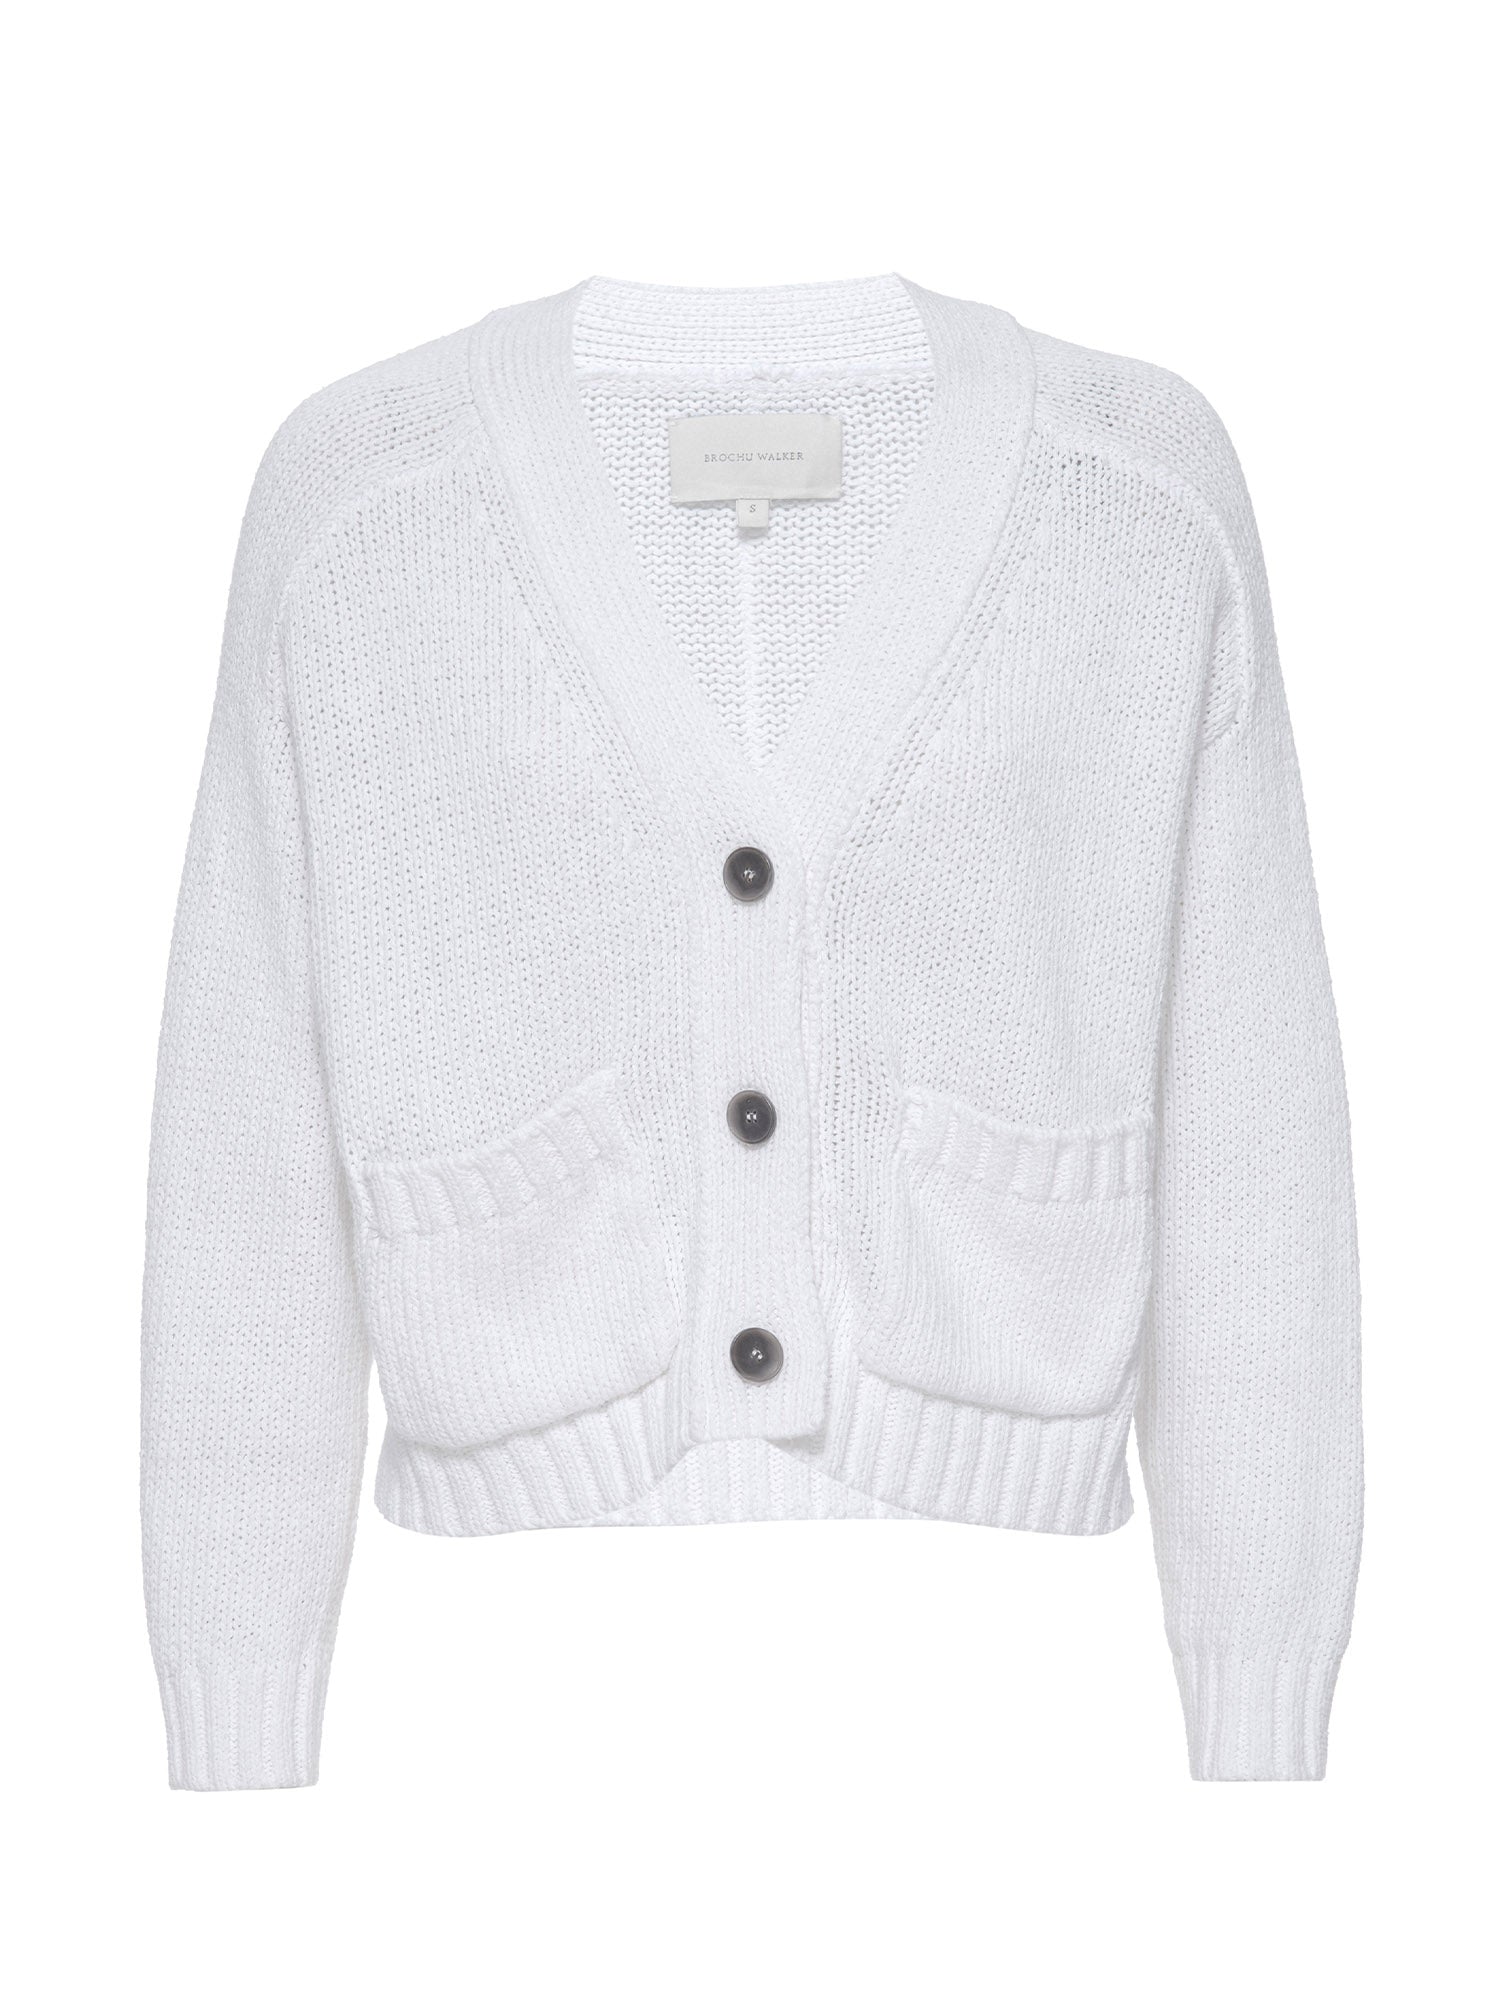 Cropped white linen cotton cardigan sweater flat view